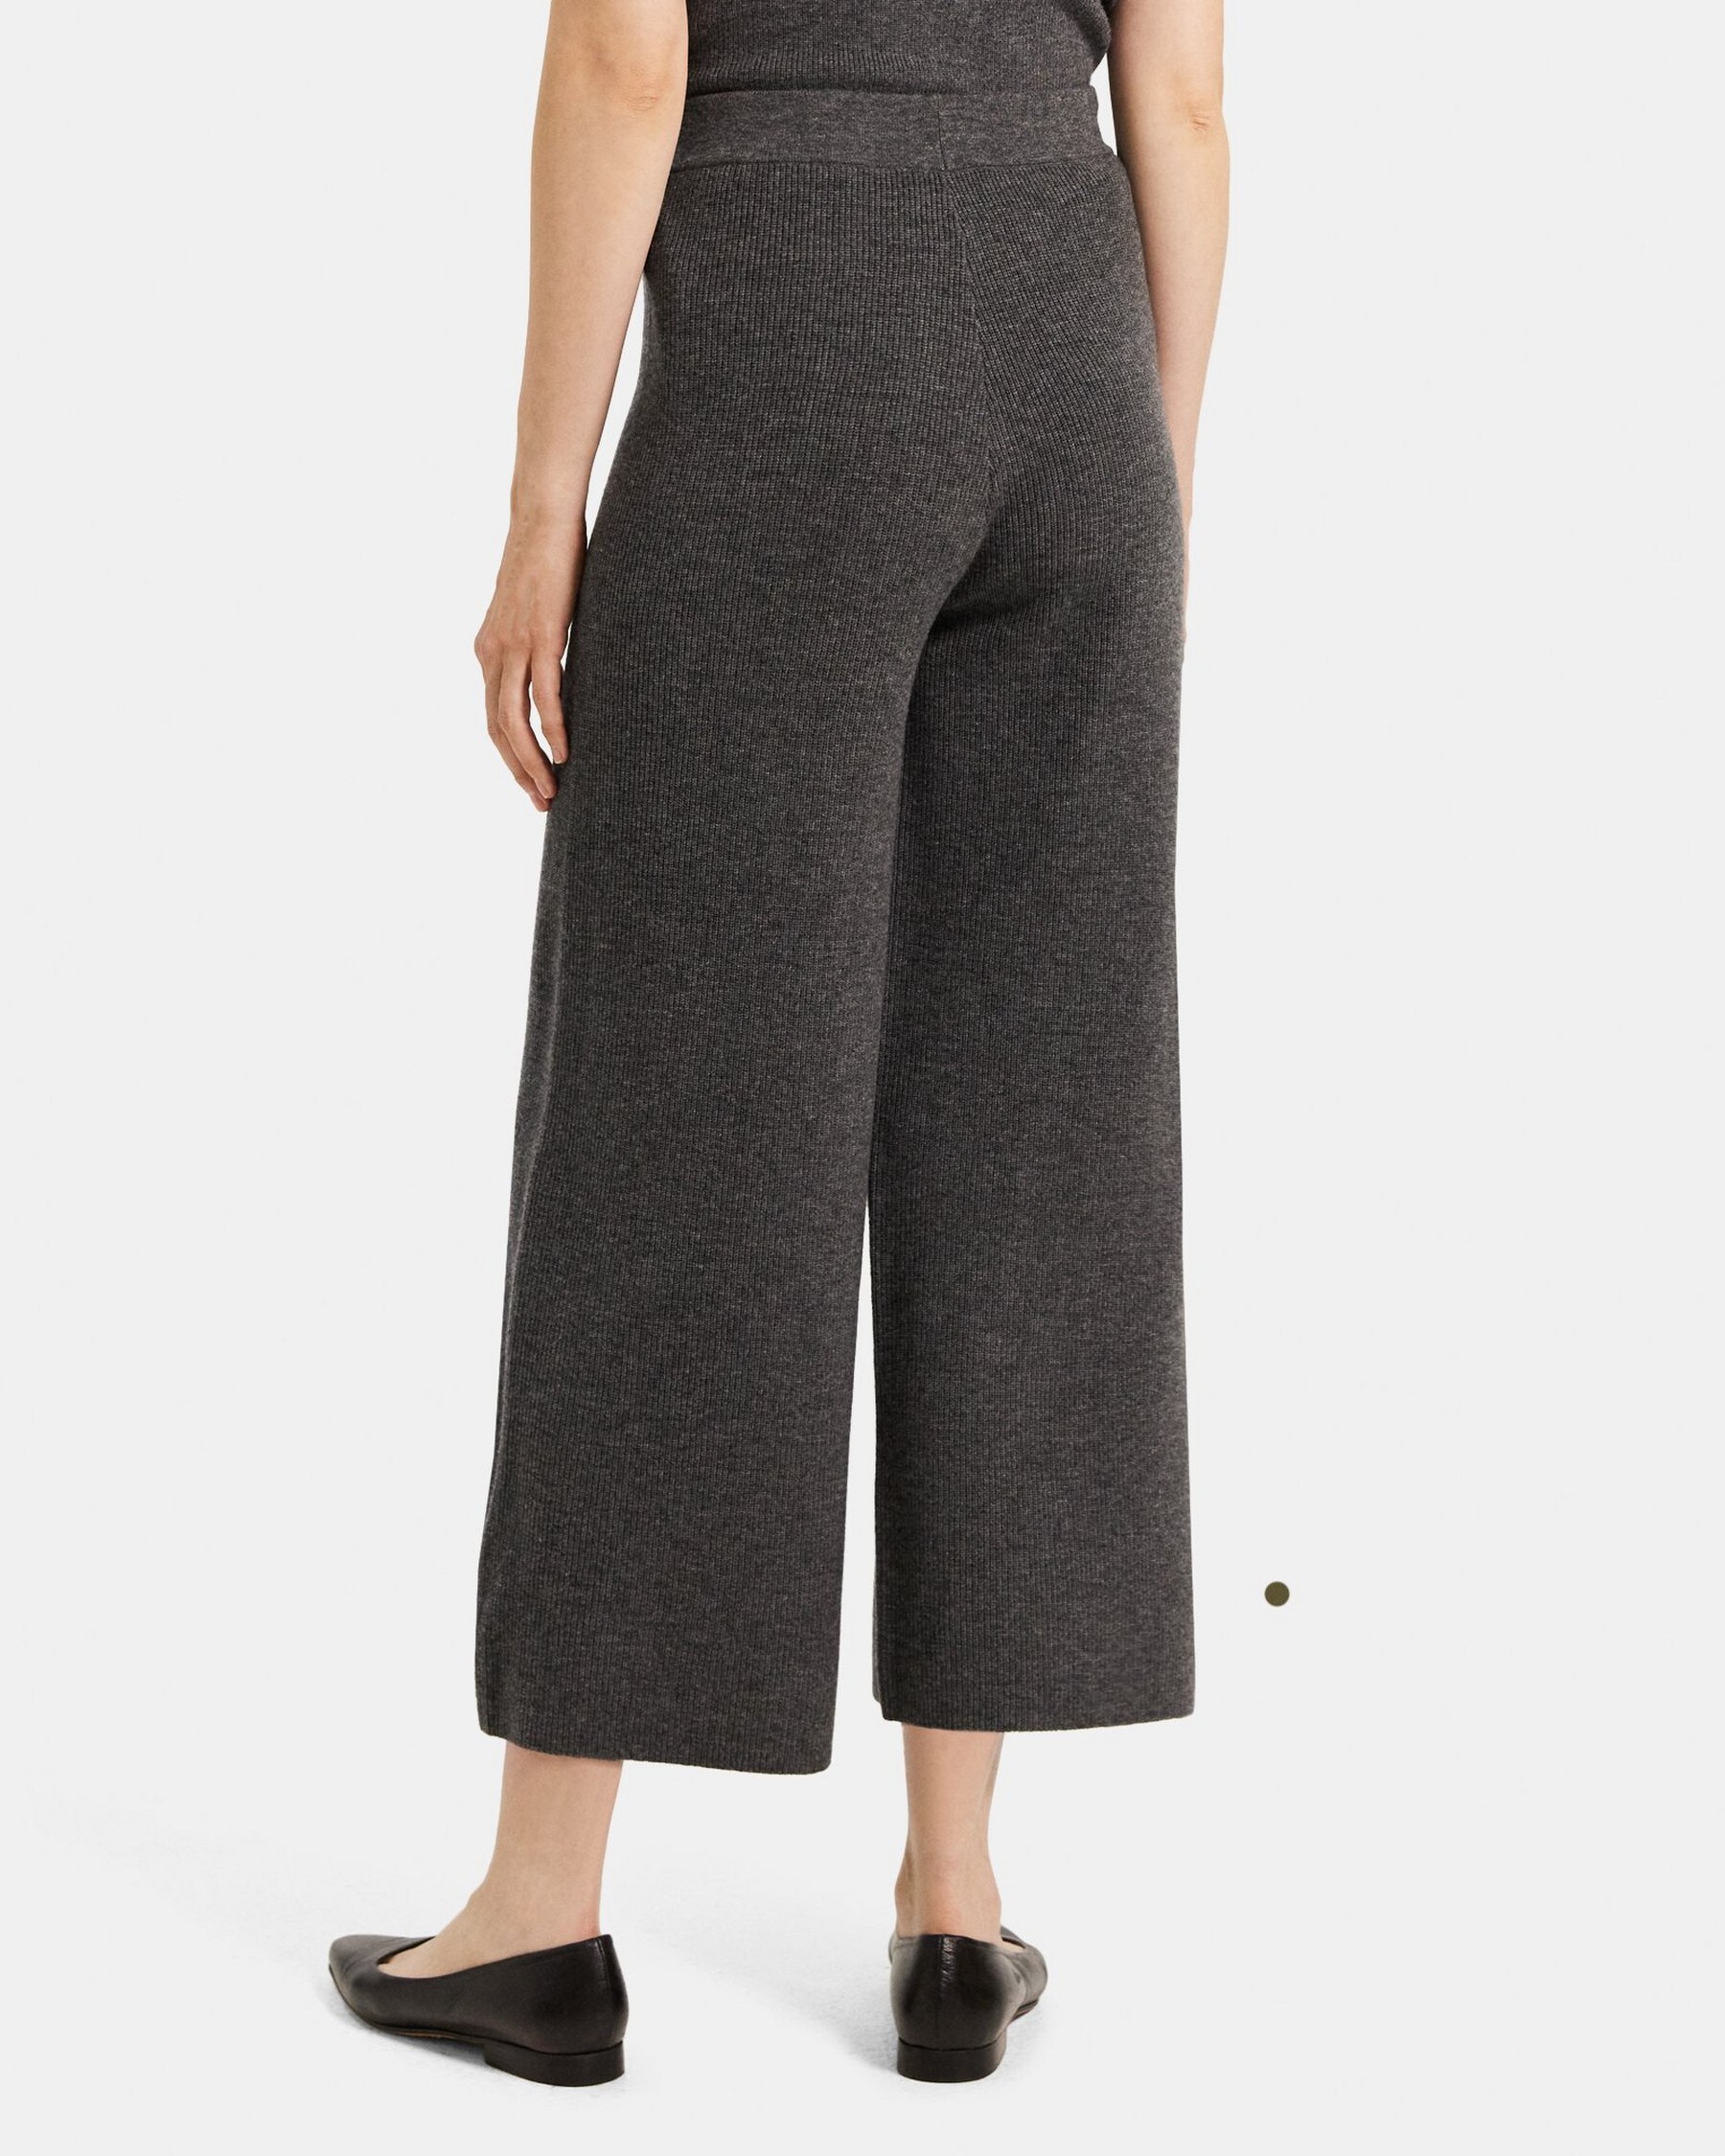 Knit Pant in Wool-Cashmere